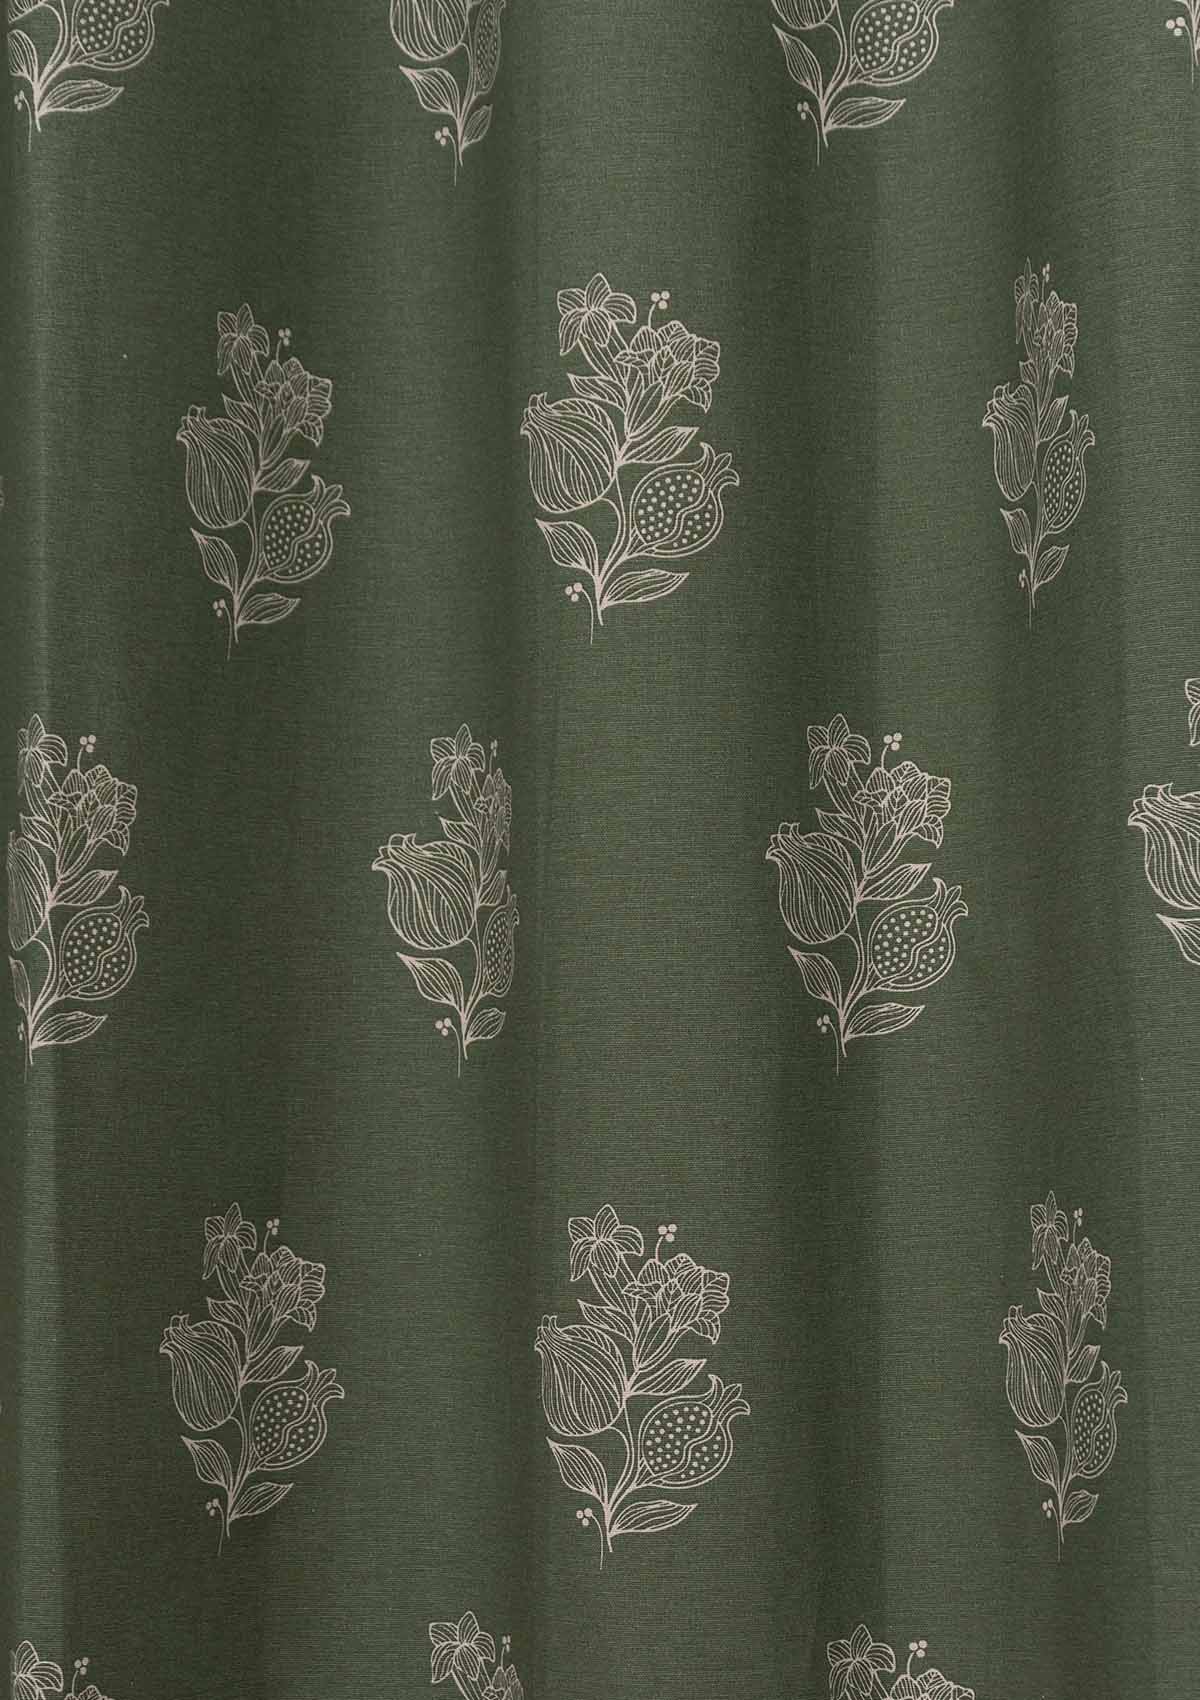 Malabar Printed 100% cotton ethnic curtain for living room & Bedroom - Room darkening - Pepper Green - Pack of 1